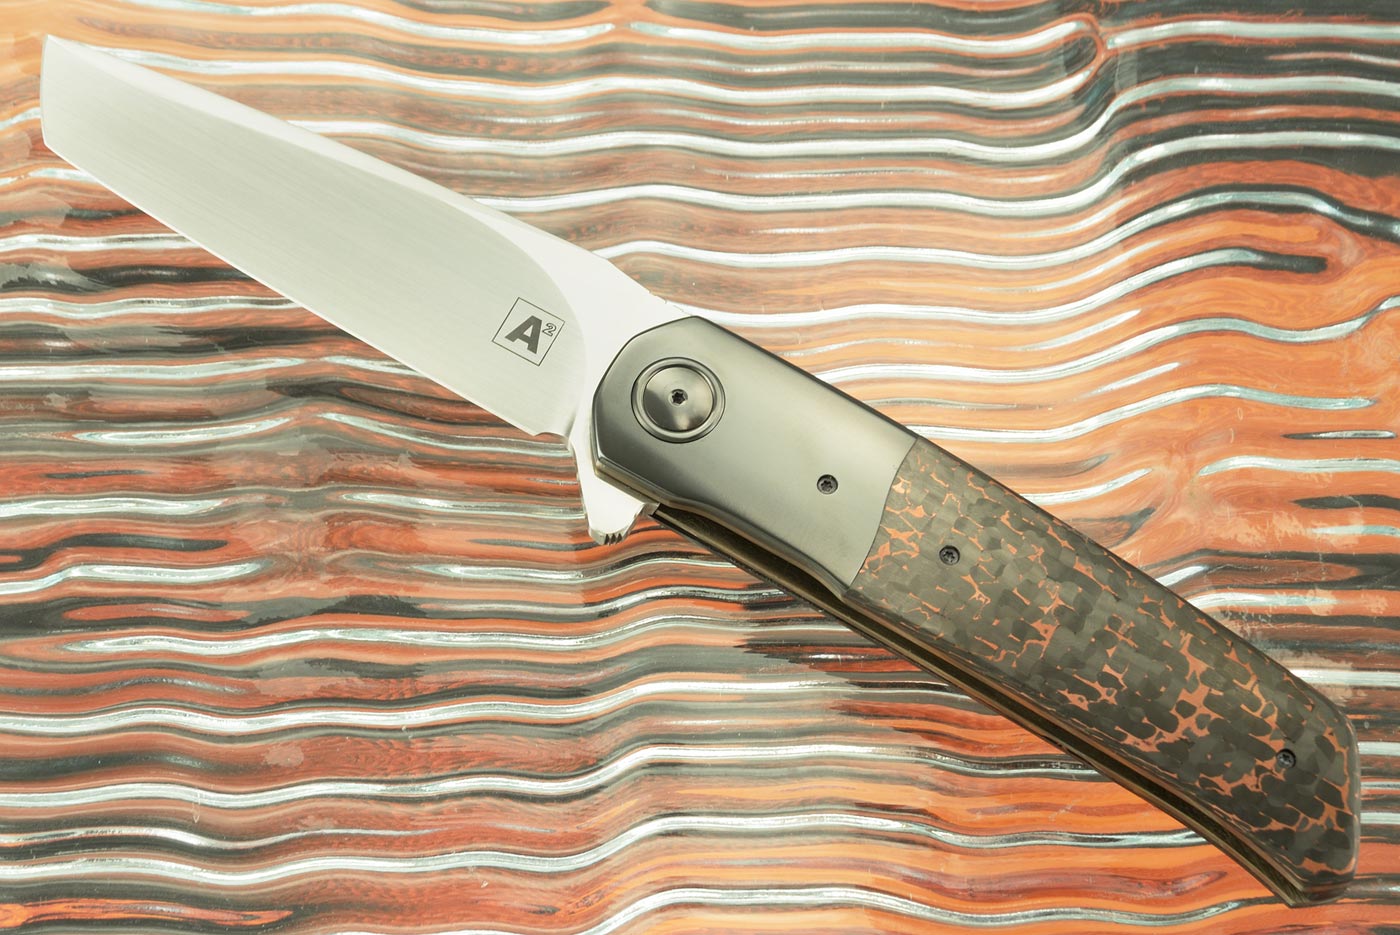 A7 Classic Flipper with Zirconium and Copper Snakeskin FatCarbon (Ceramic IKBS)